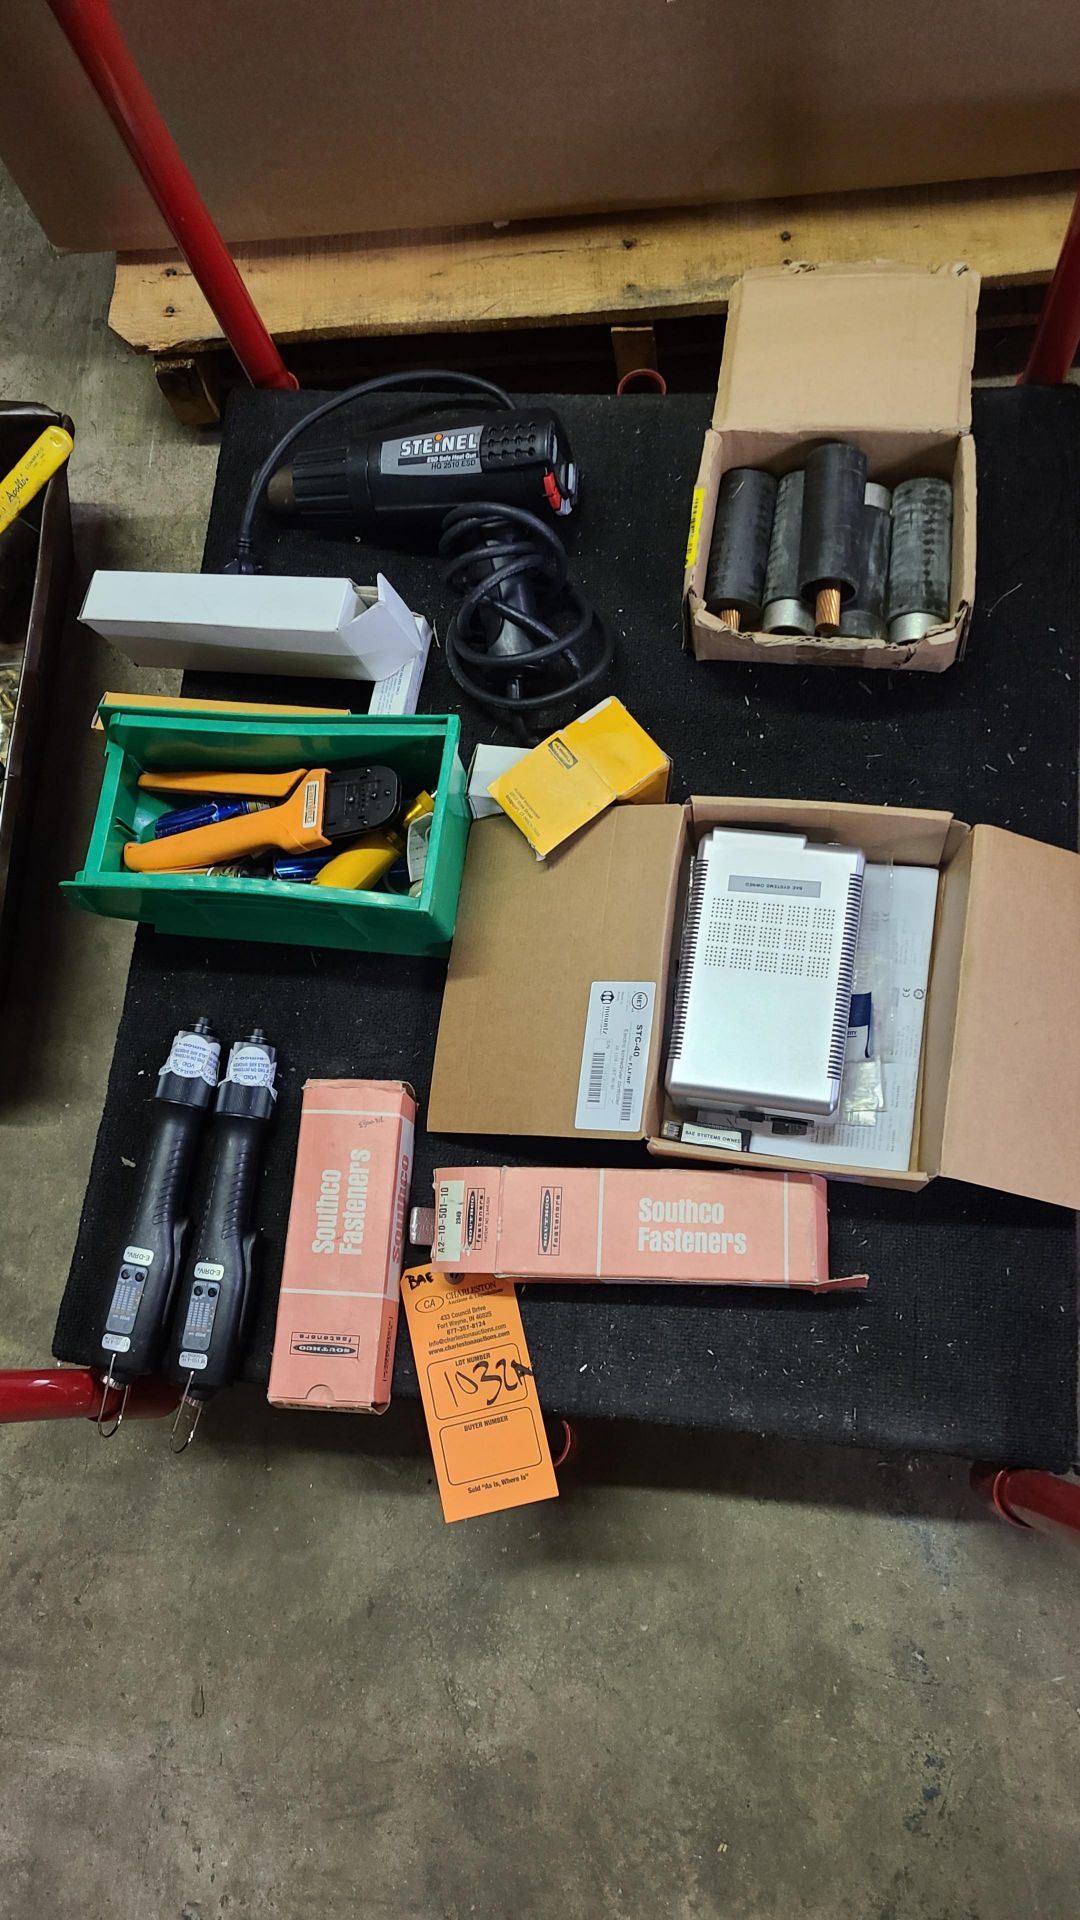 CONTENTS OF CART: STEINEL EST SAFETY HEAT GUN; PINADAPTER TERMINALS AND COVERS; MET STC-40